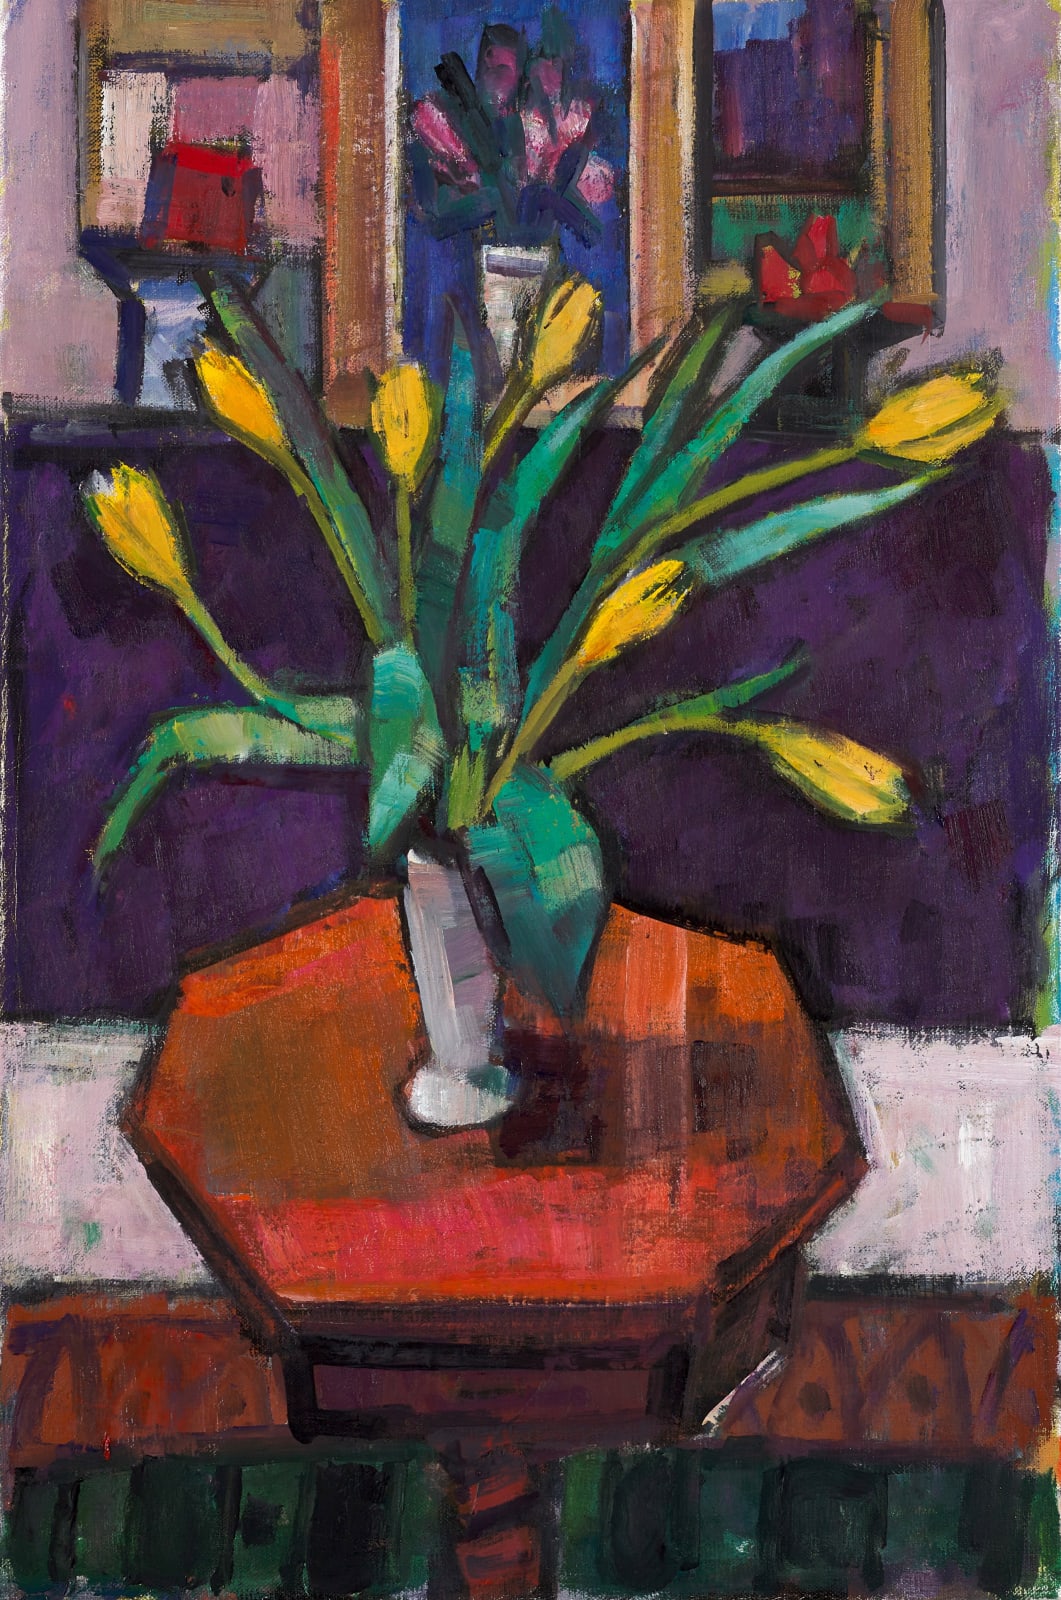 Archie Forrest, Glorious Tulips, 2022